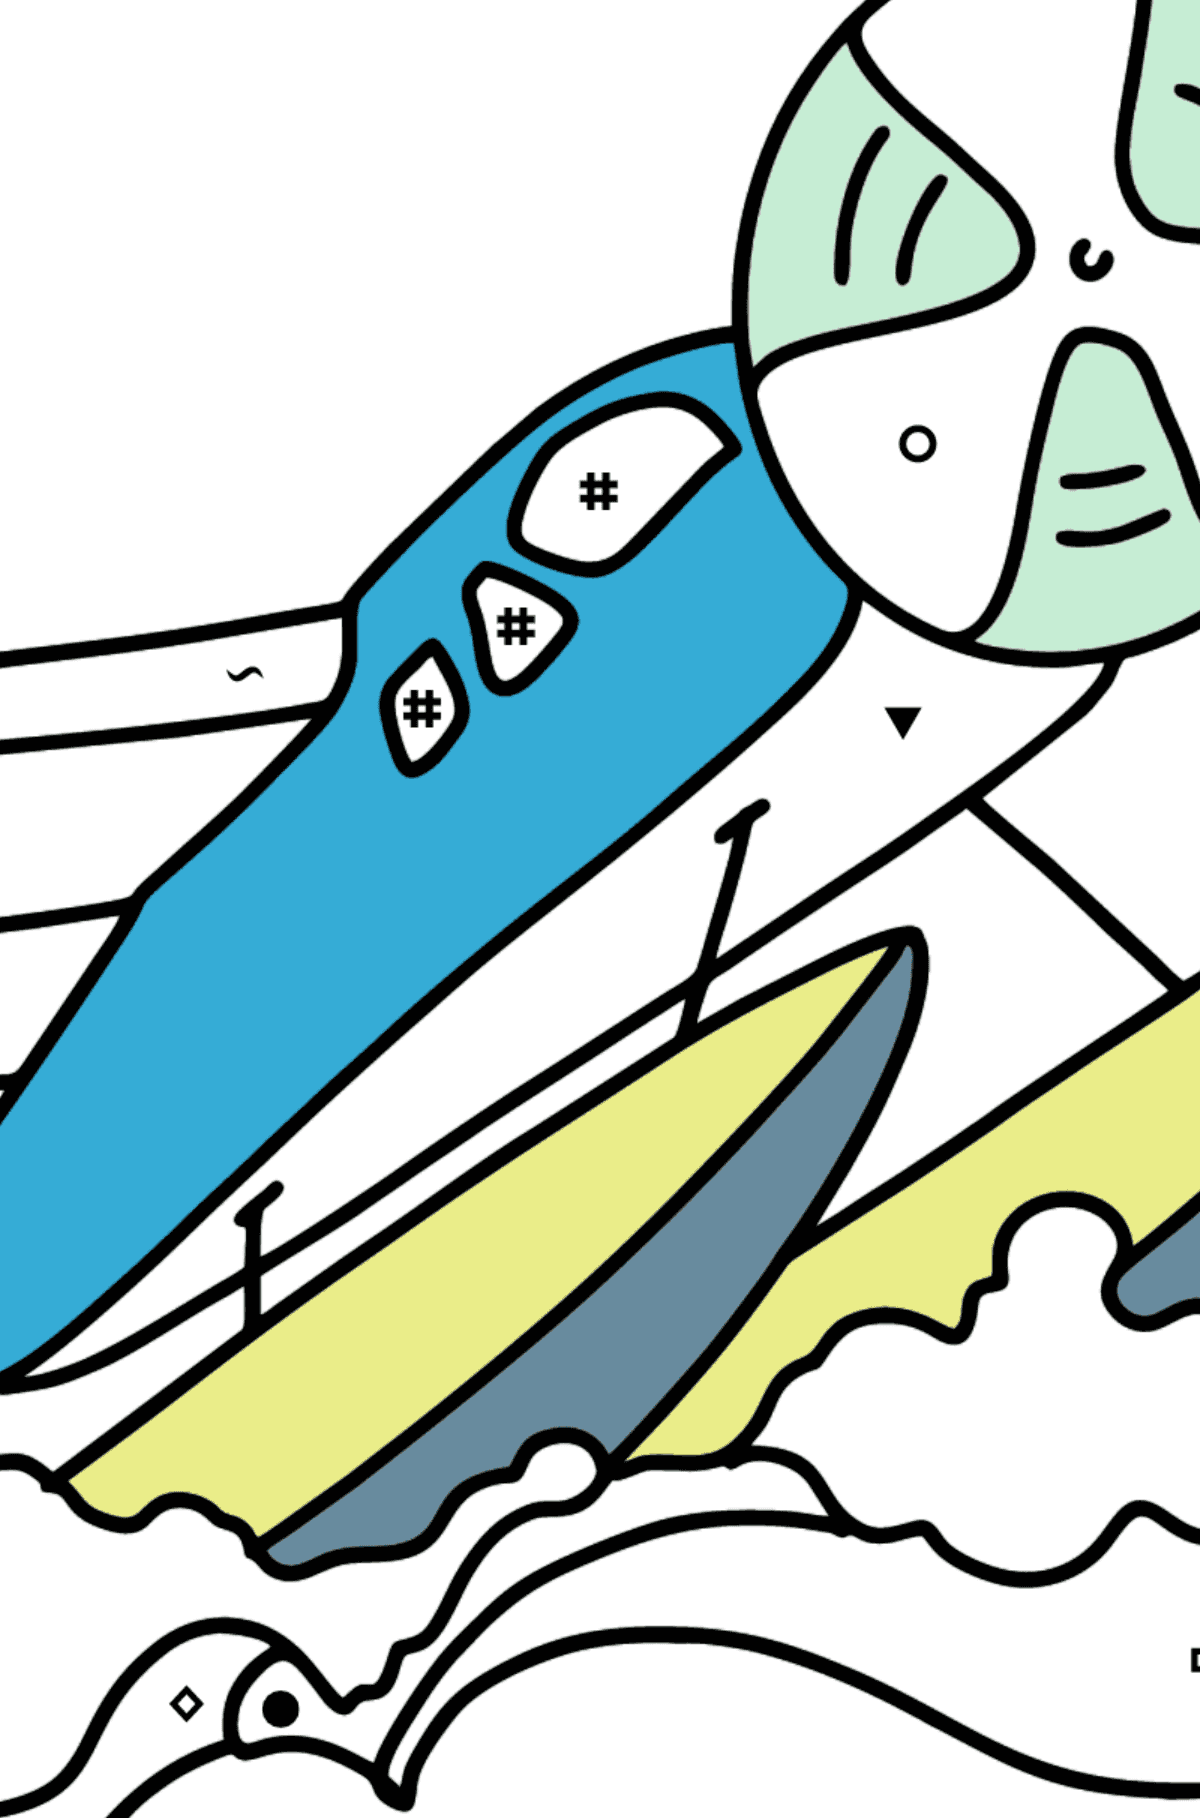 Amphibious Airplane coloring page - Coloring by Symbols and Geometric Shapes for Kids